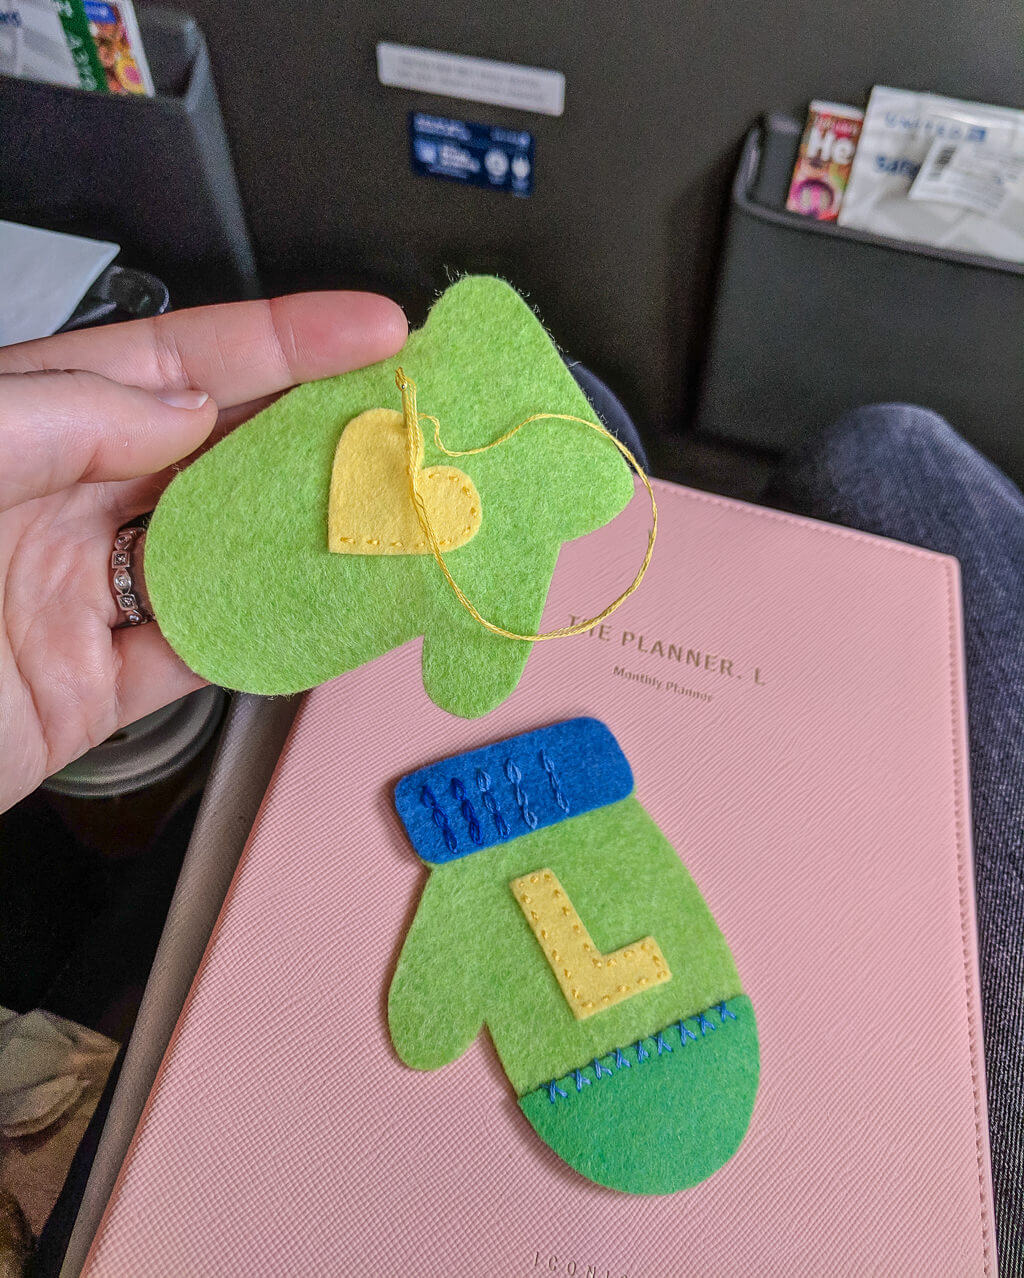 Embroidering felt mini mitten ornaments while on a plane